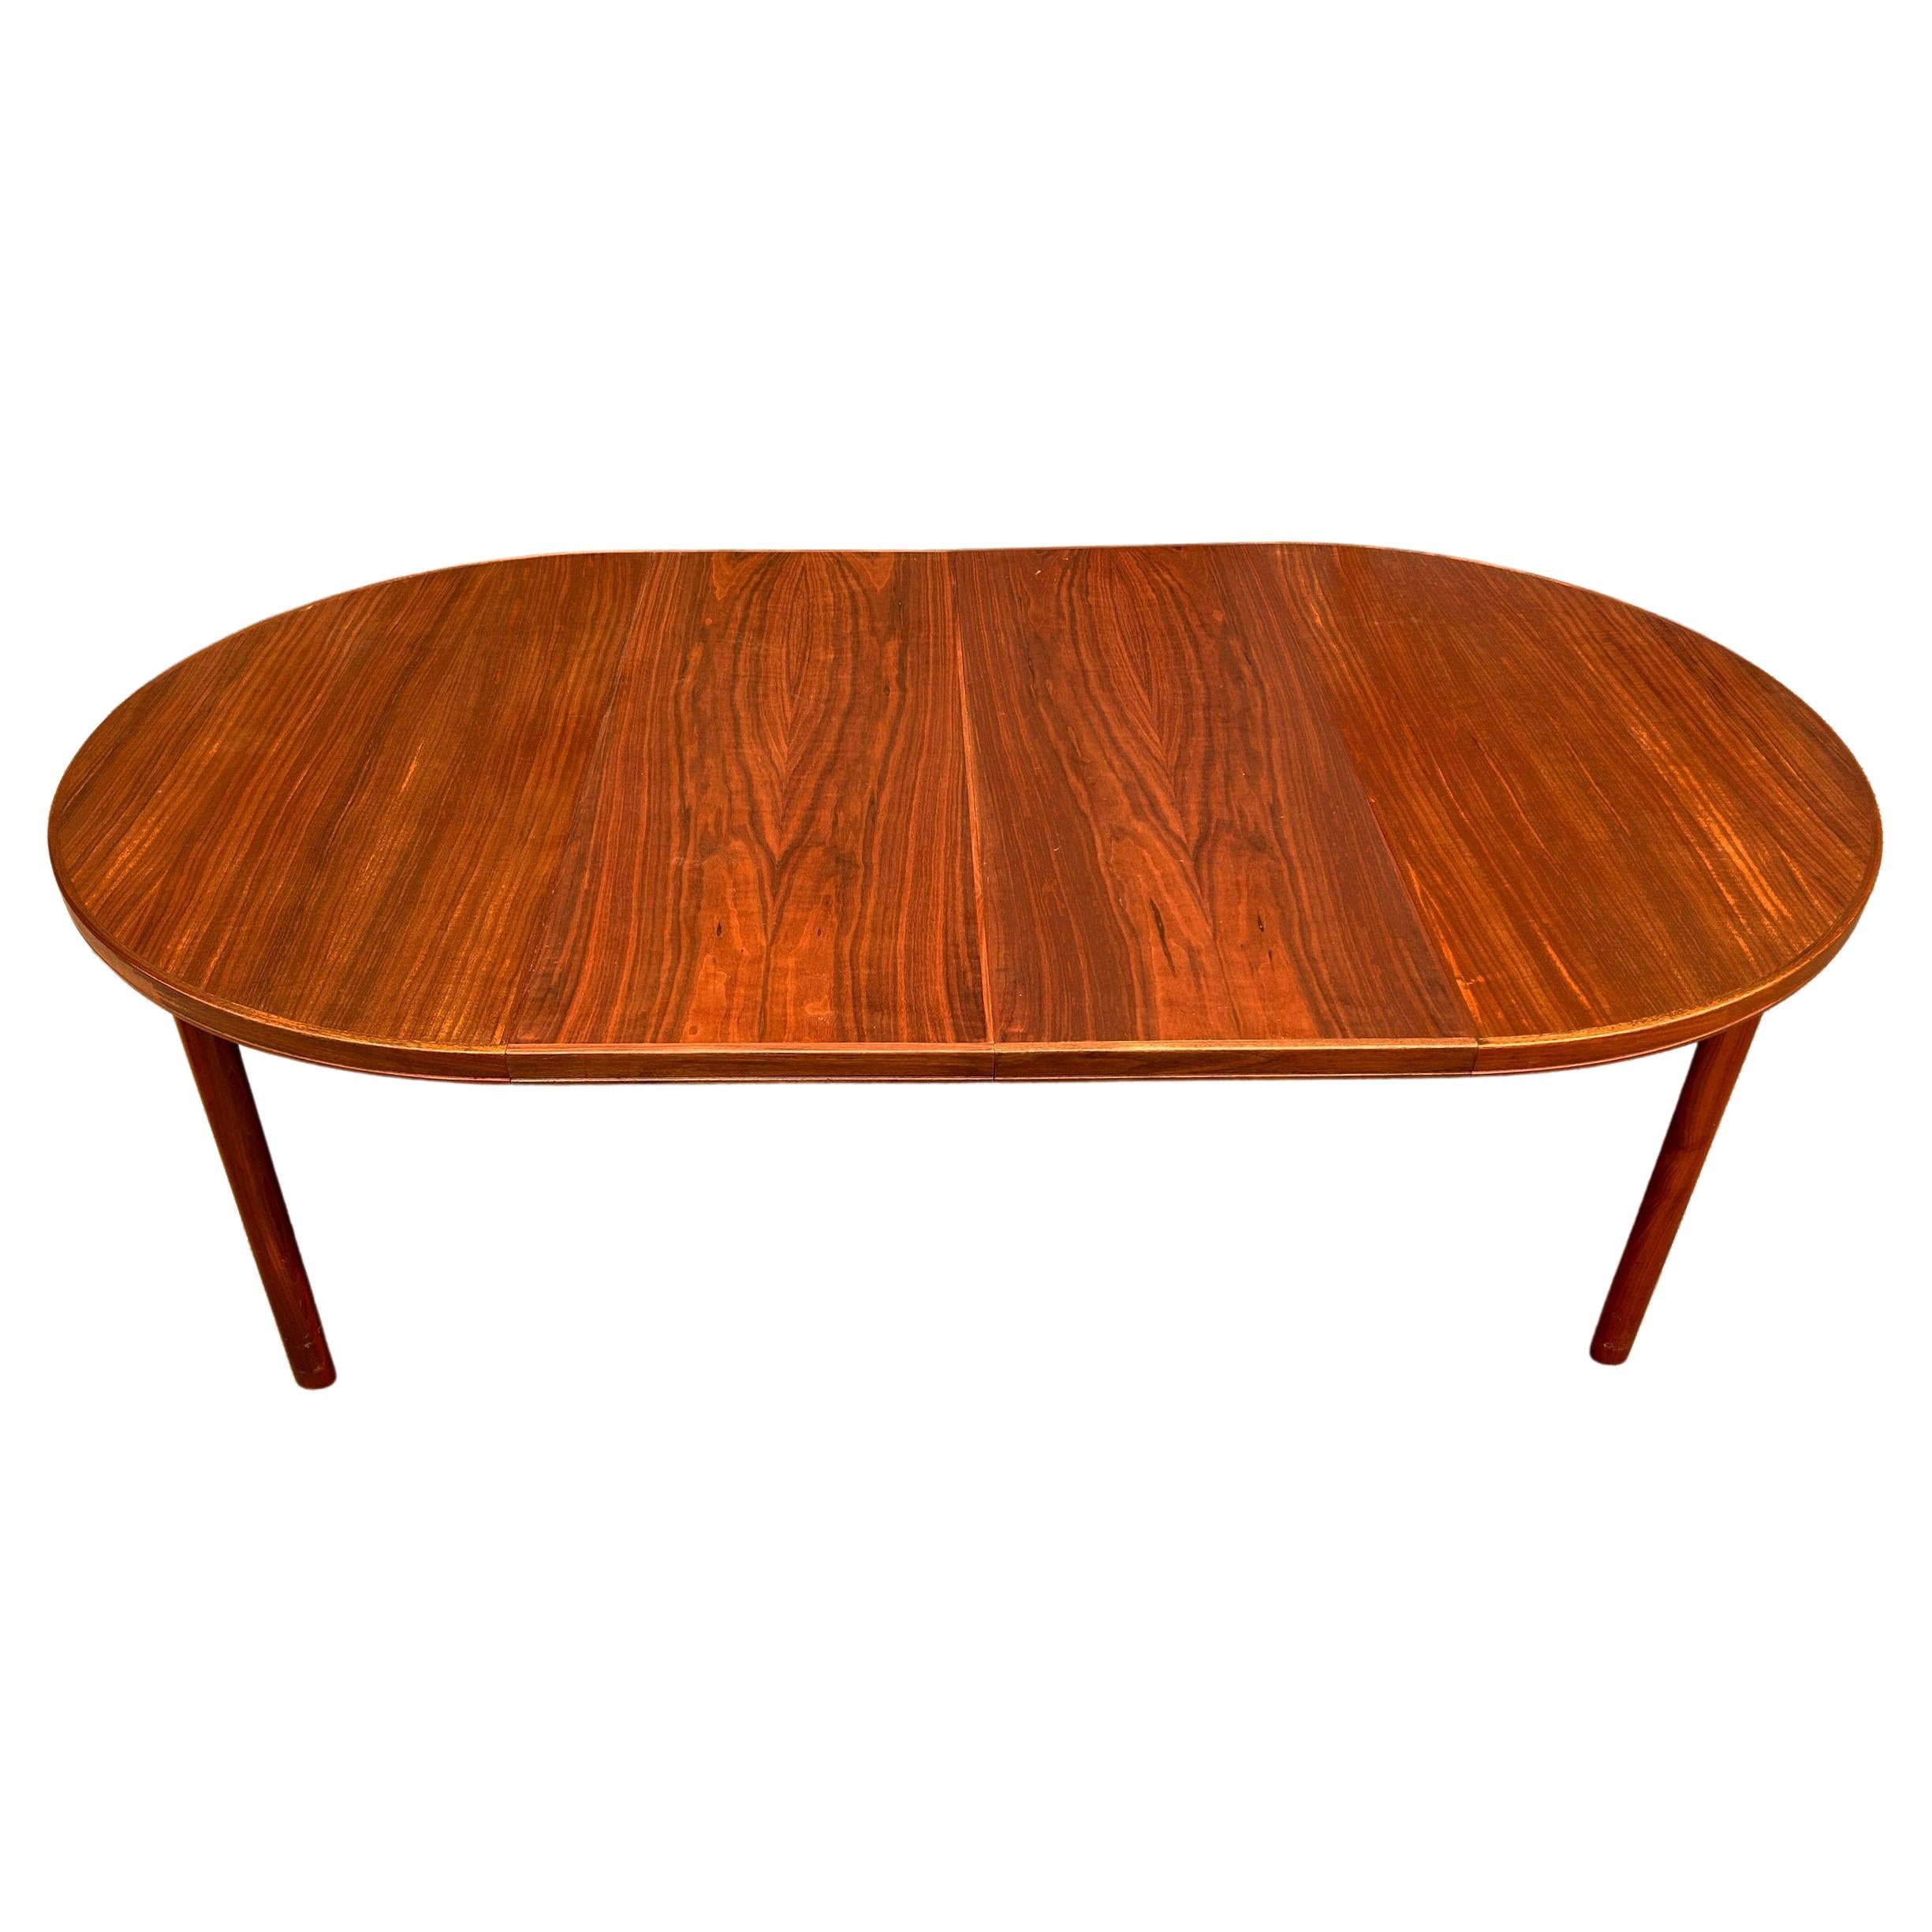 Midcentury Swedish Modern Round Teak Dining Table by DUX with 2 Leaves For Sale